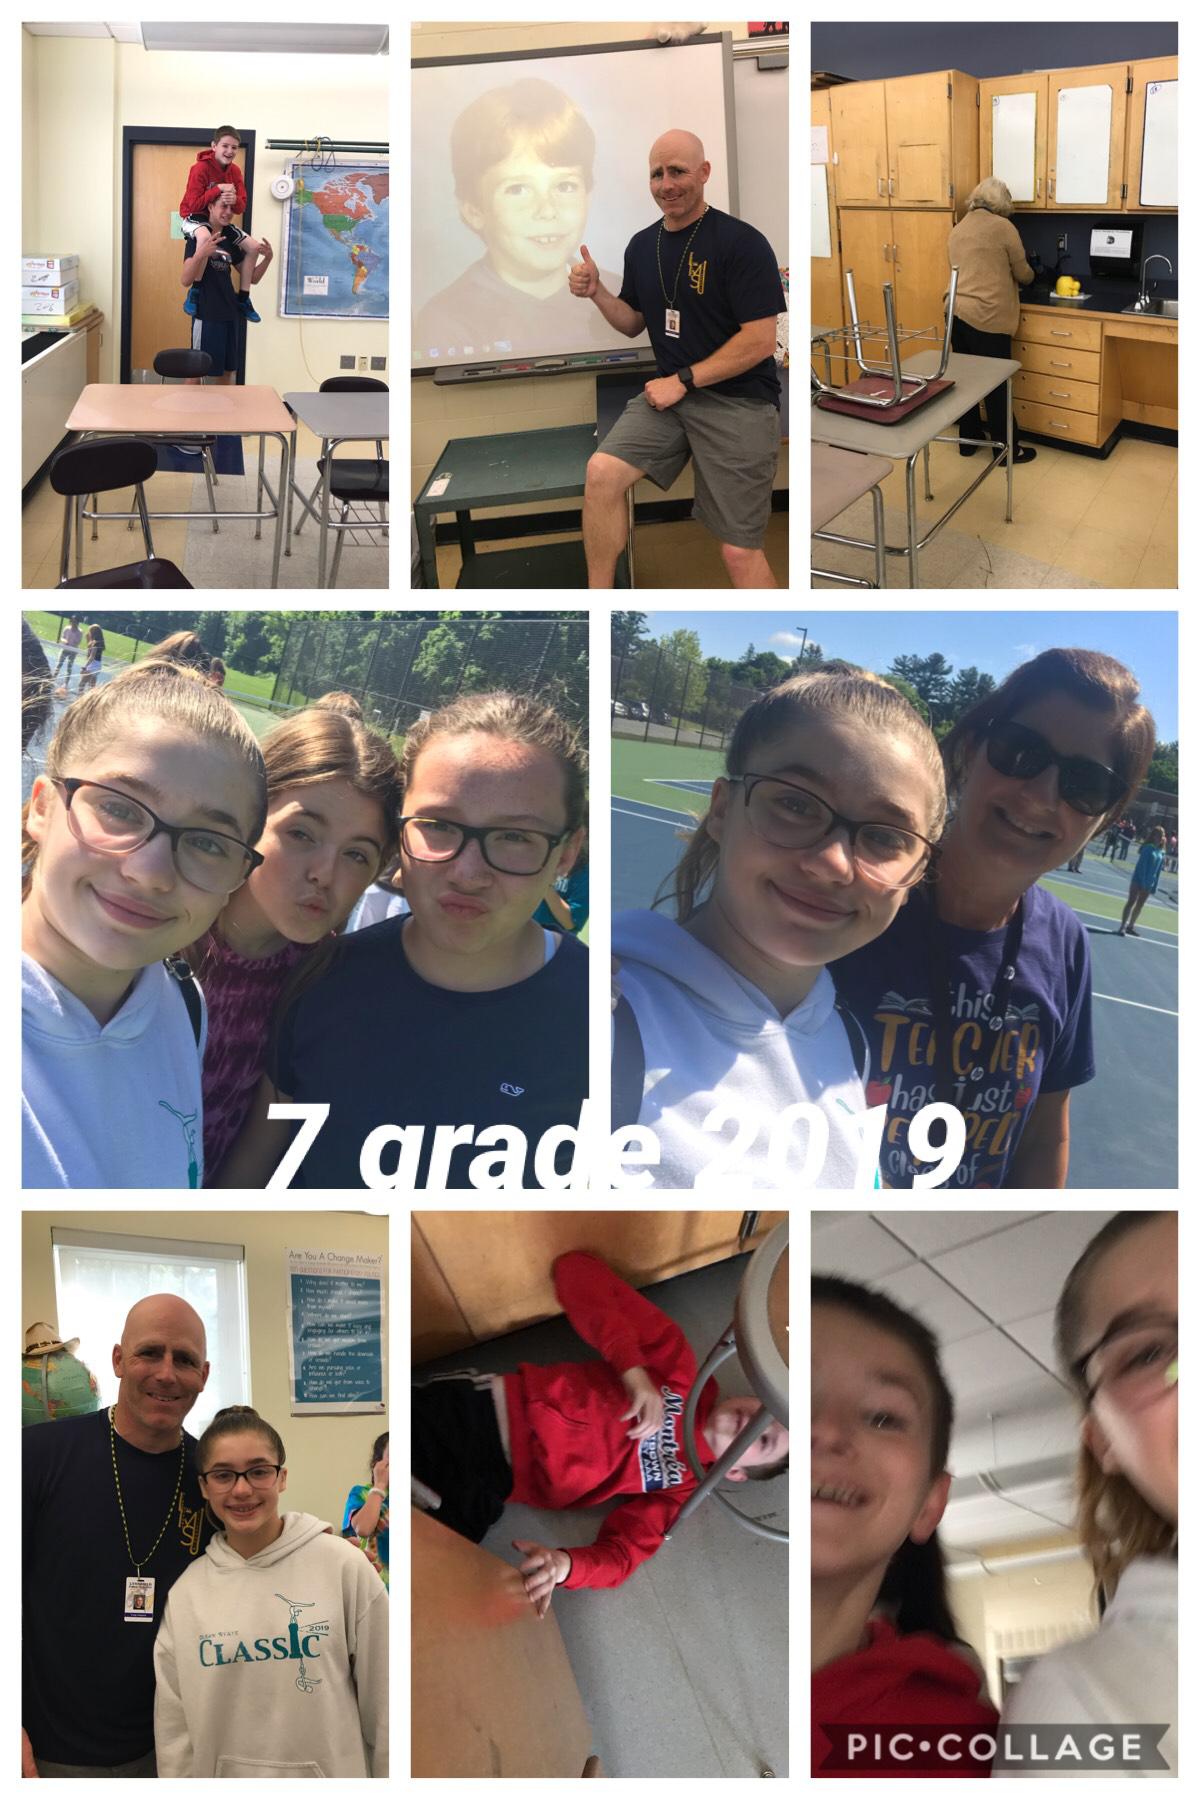 Last day of school for 7 grade 

Never been more emotional at the end of a school year 